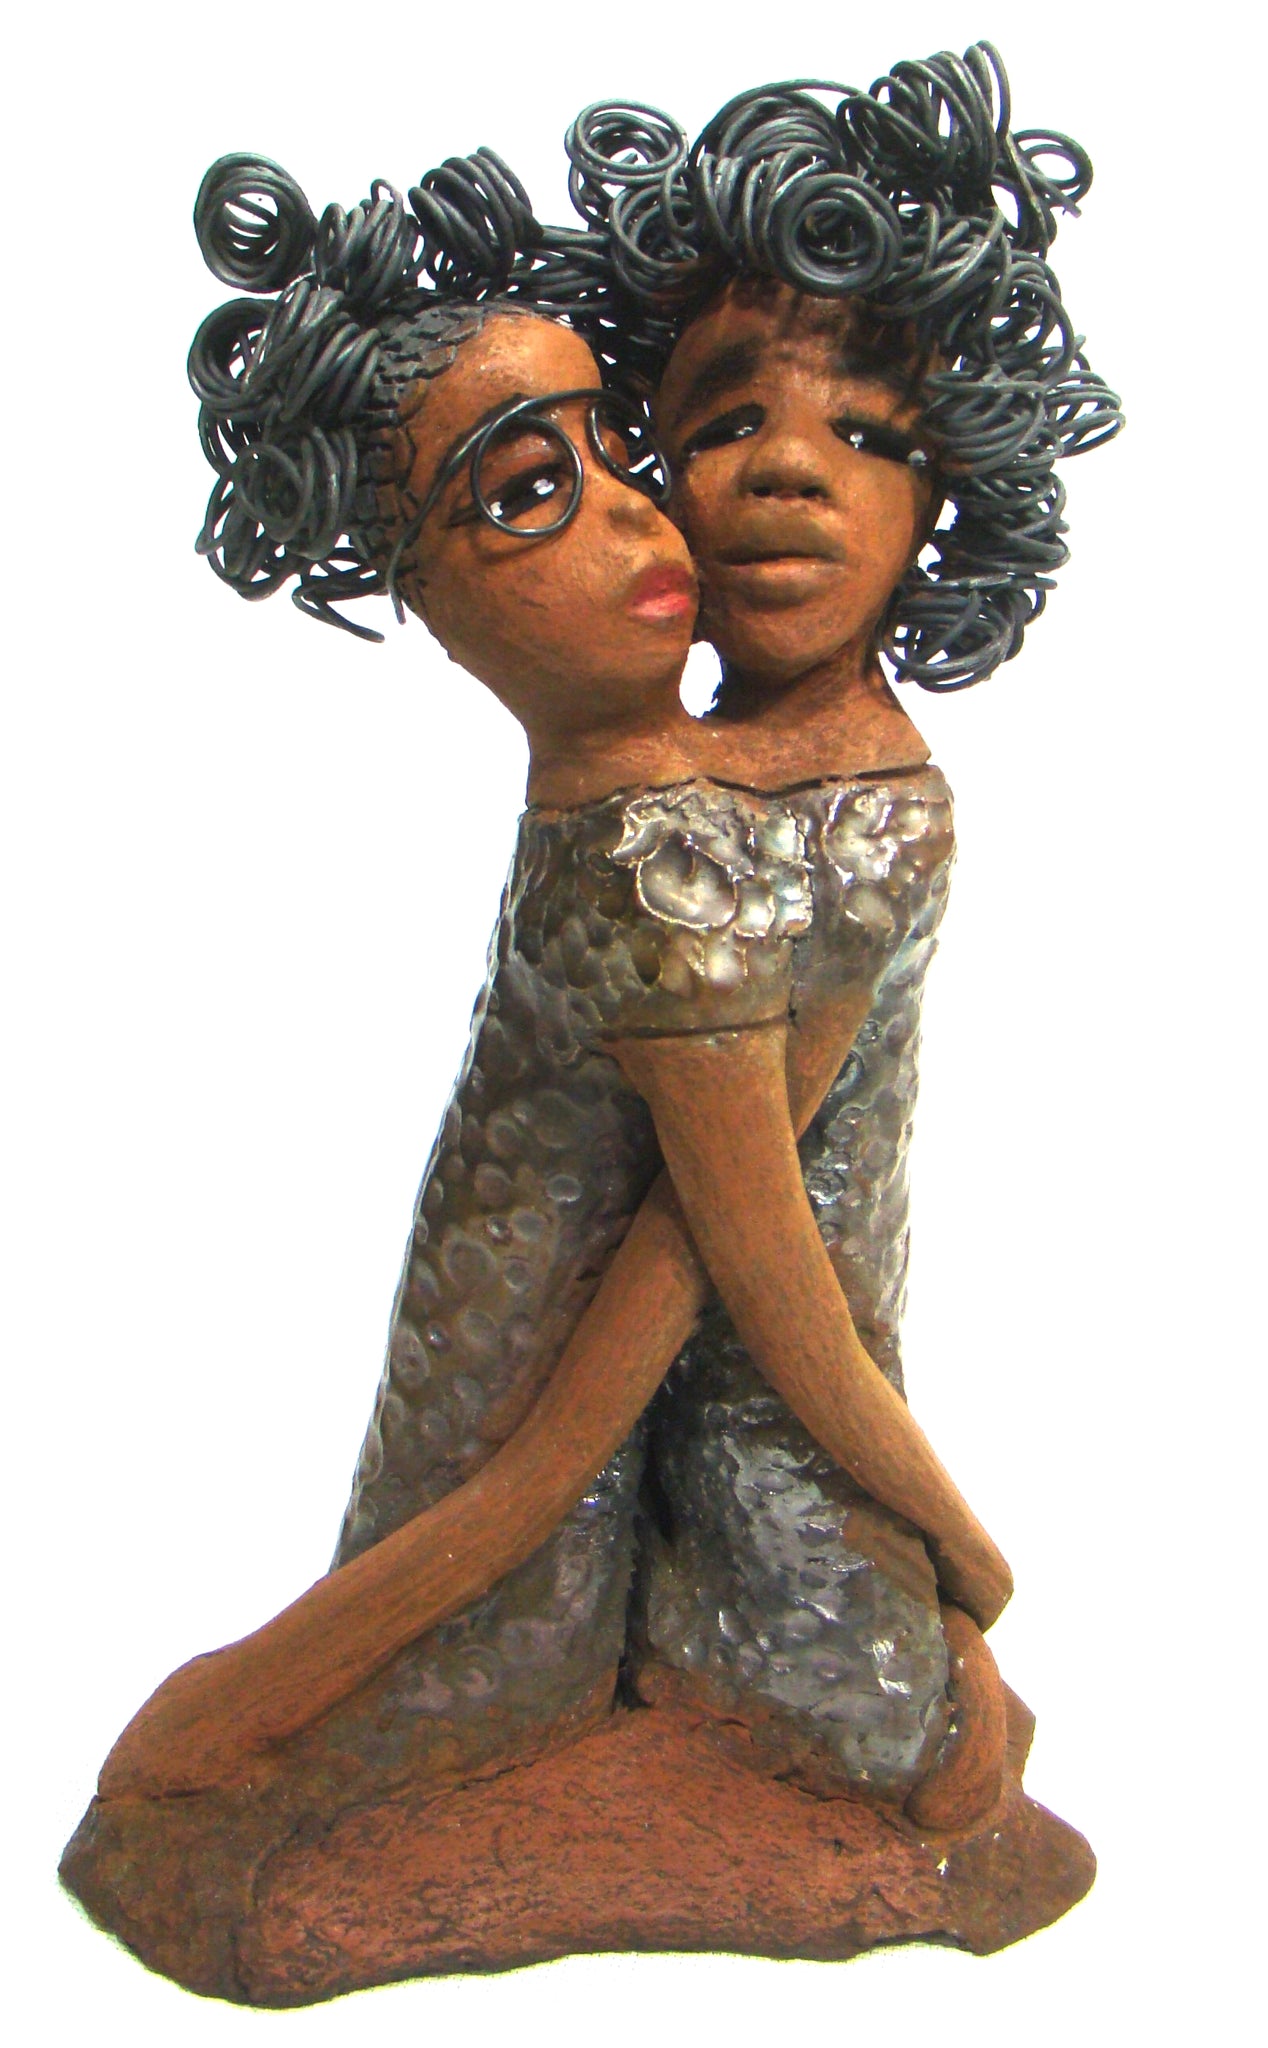      My BFF stands 13" x 8" x 4" and weighs 4.13 lbs.     Both girls have lovely honey brown complexions.     Their dresses are textured and have copper metallic glazes.     The long loving arms of My BFF embrace one another with love.     My BFF has over 25 feet of curly 16 gauge wire hair.     My BFF represents the close bond and friendship that has developed between all women of every race, ethnicity, and color.     My BFF will make an excellent gift to your BFF!     Free Shipping!